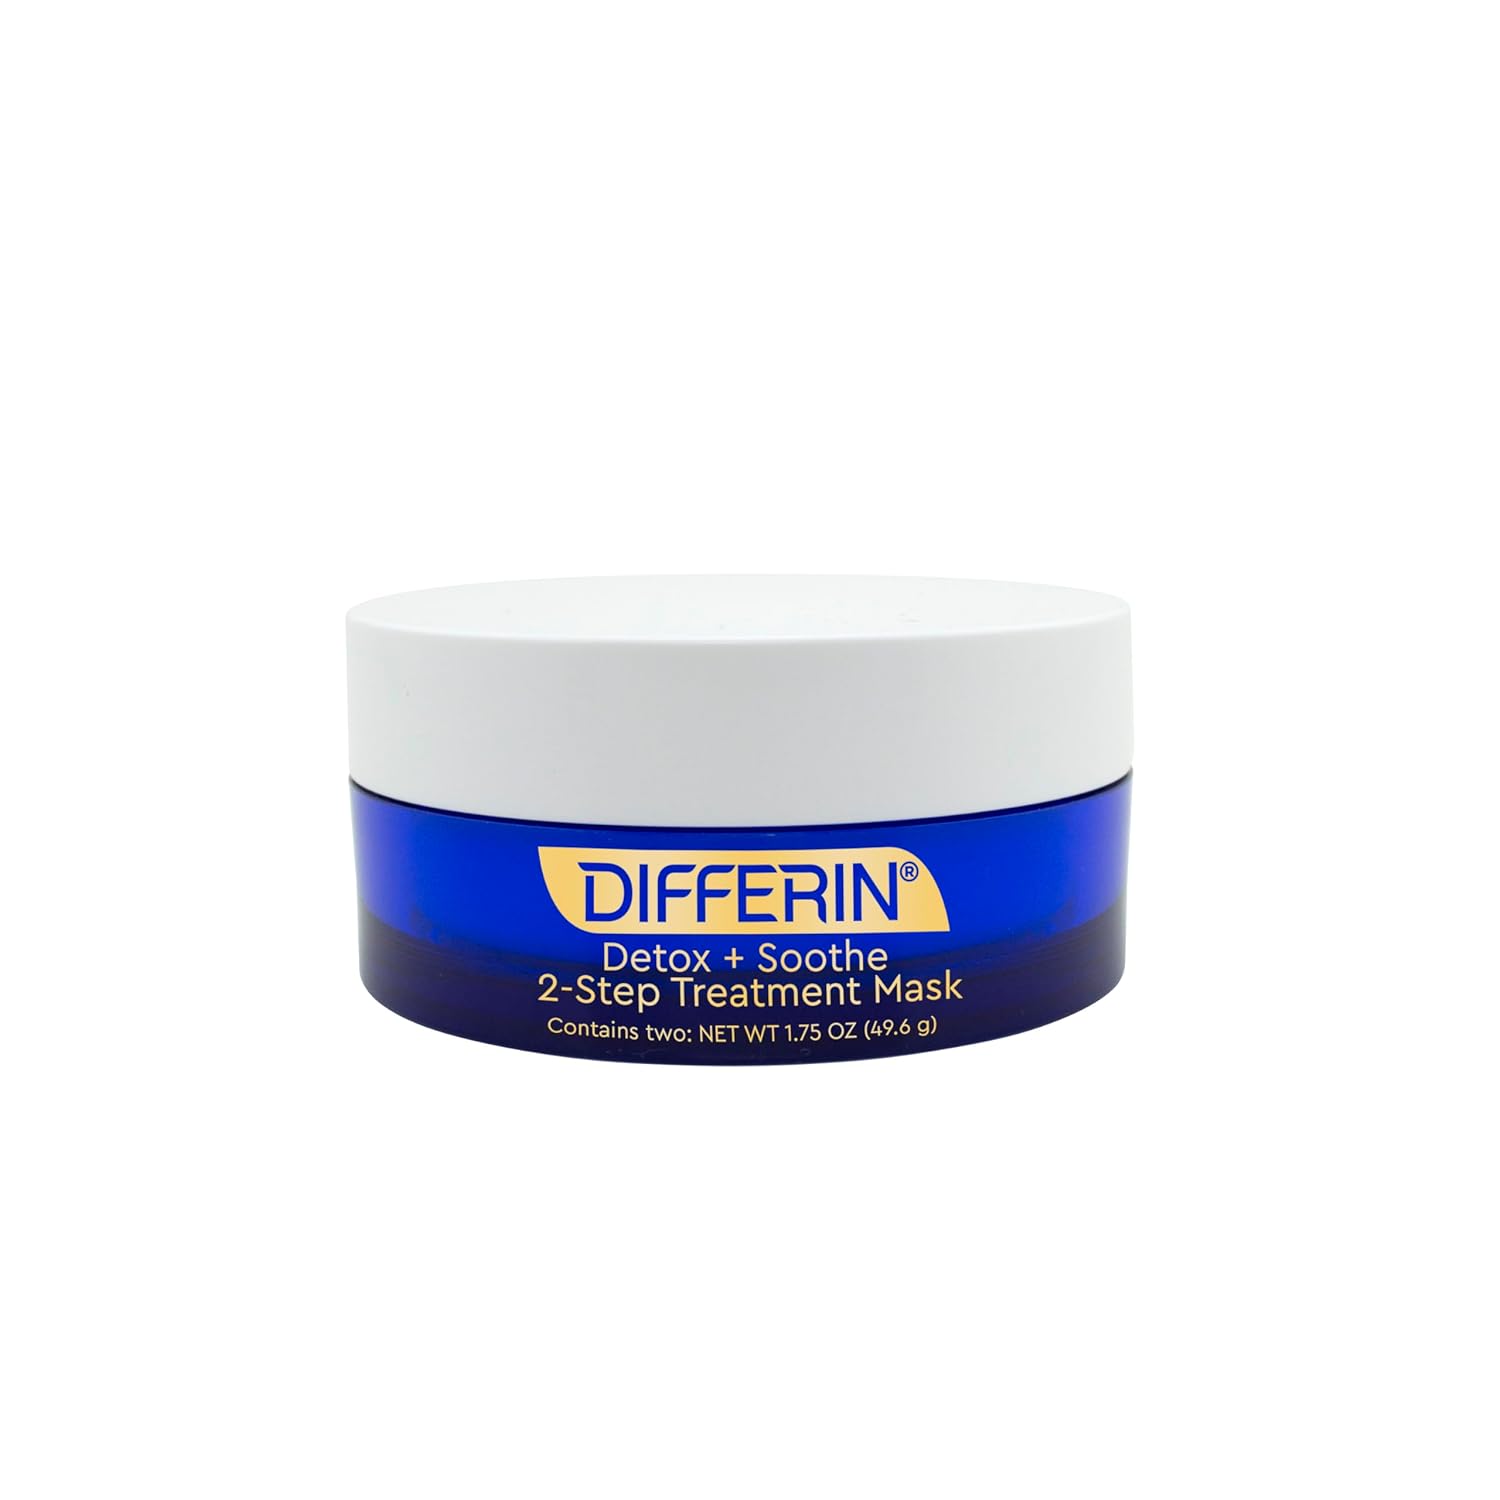 Differin Clay Face Mask, Detox and Soothe 2 Step Treatm